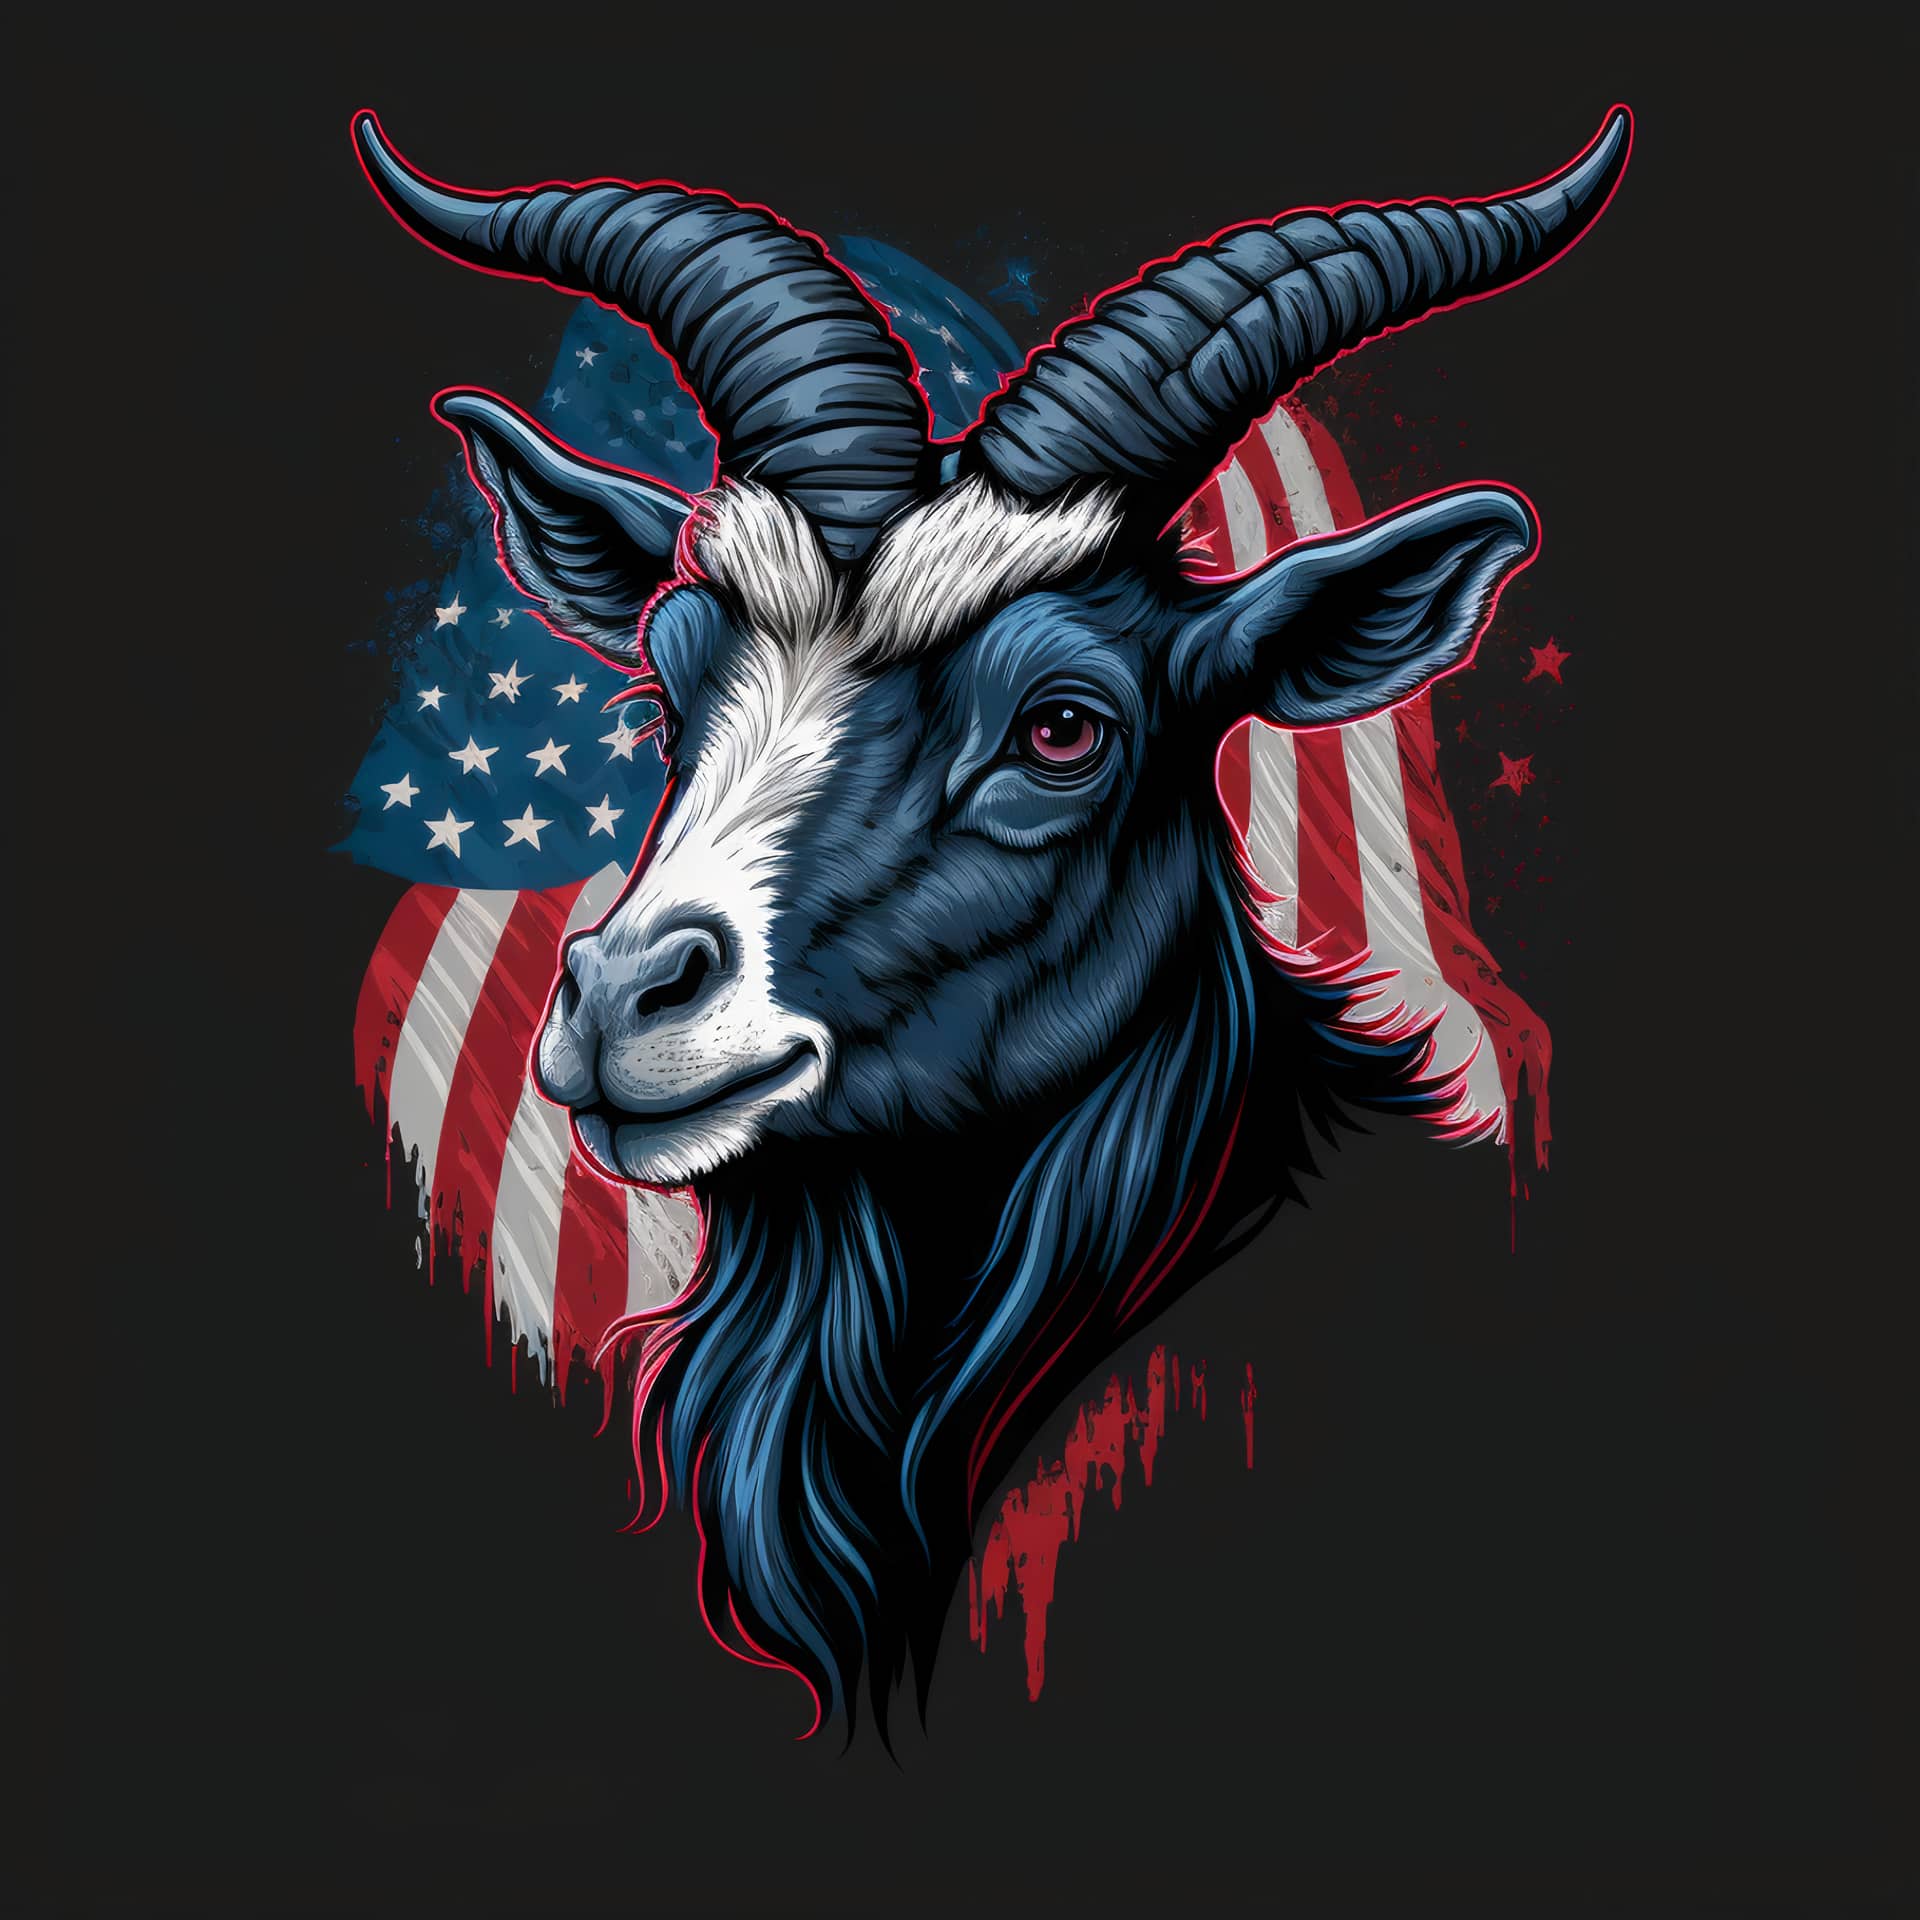 Fb profile pic goat design with american flag image